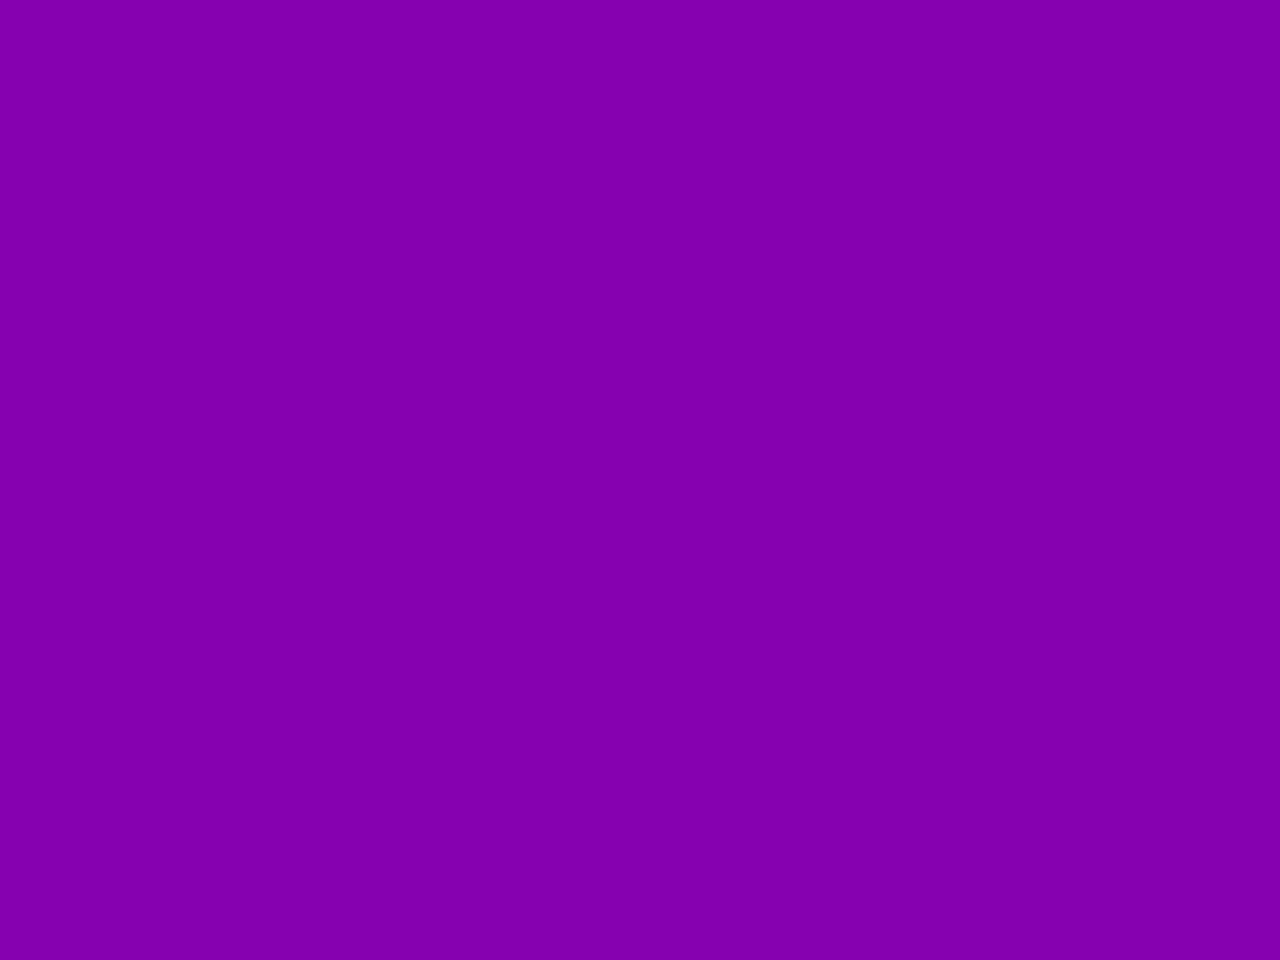 1280x960 Violet RYB Solid Color Background